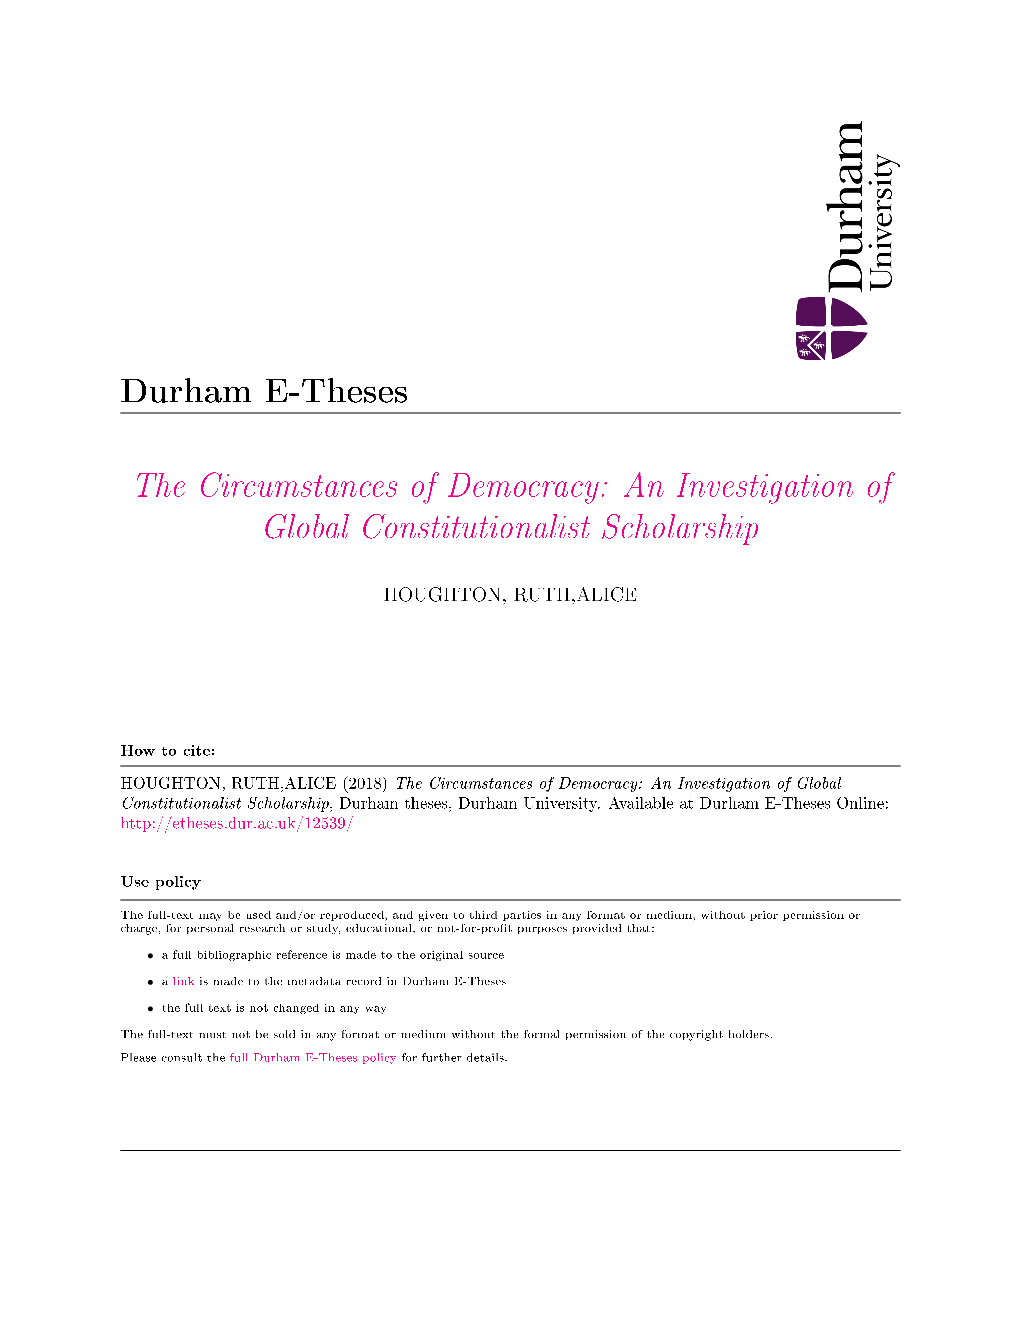 The Circumstances of Democracy: an Investigation of Global Constitutionalist Scholarship